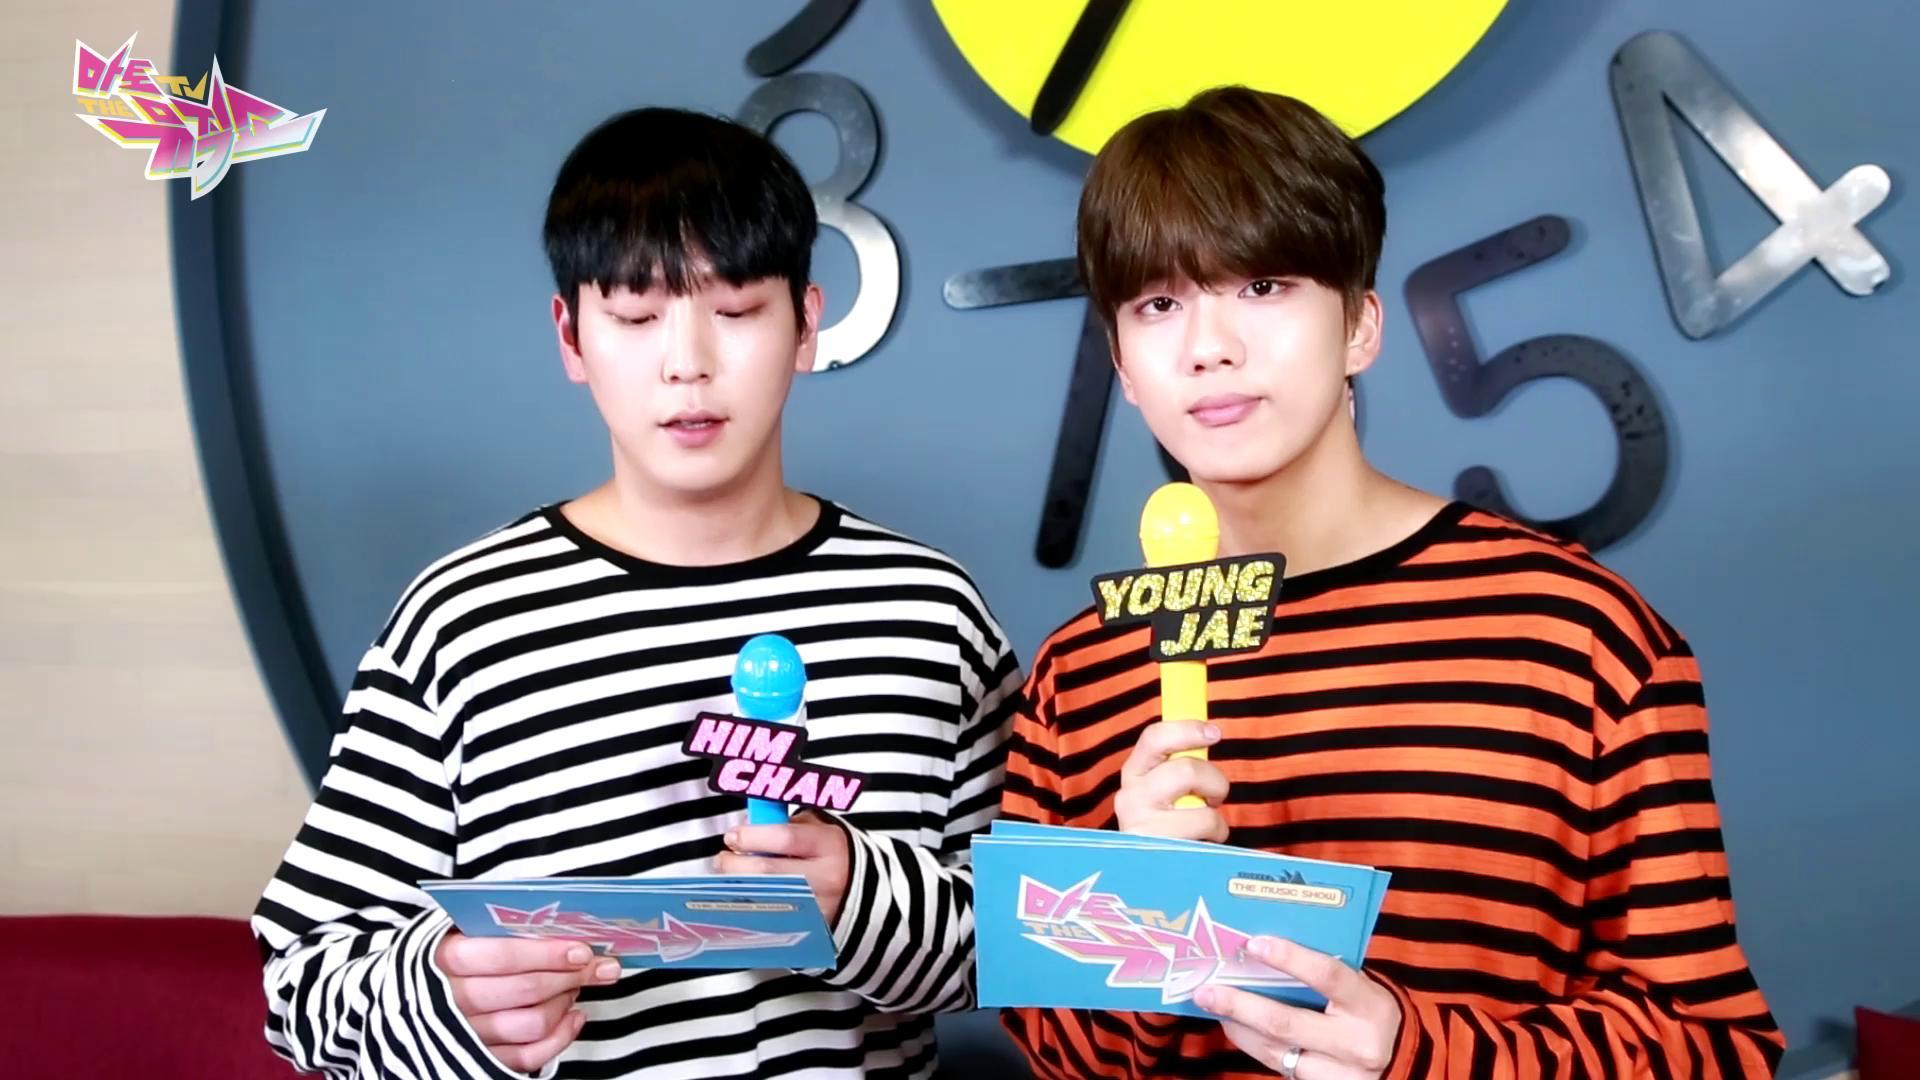 [MATO TV ON-AIR] B.A.P Him Chan & Young Jae & Jong Up - THE MUSIC SHOW